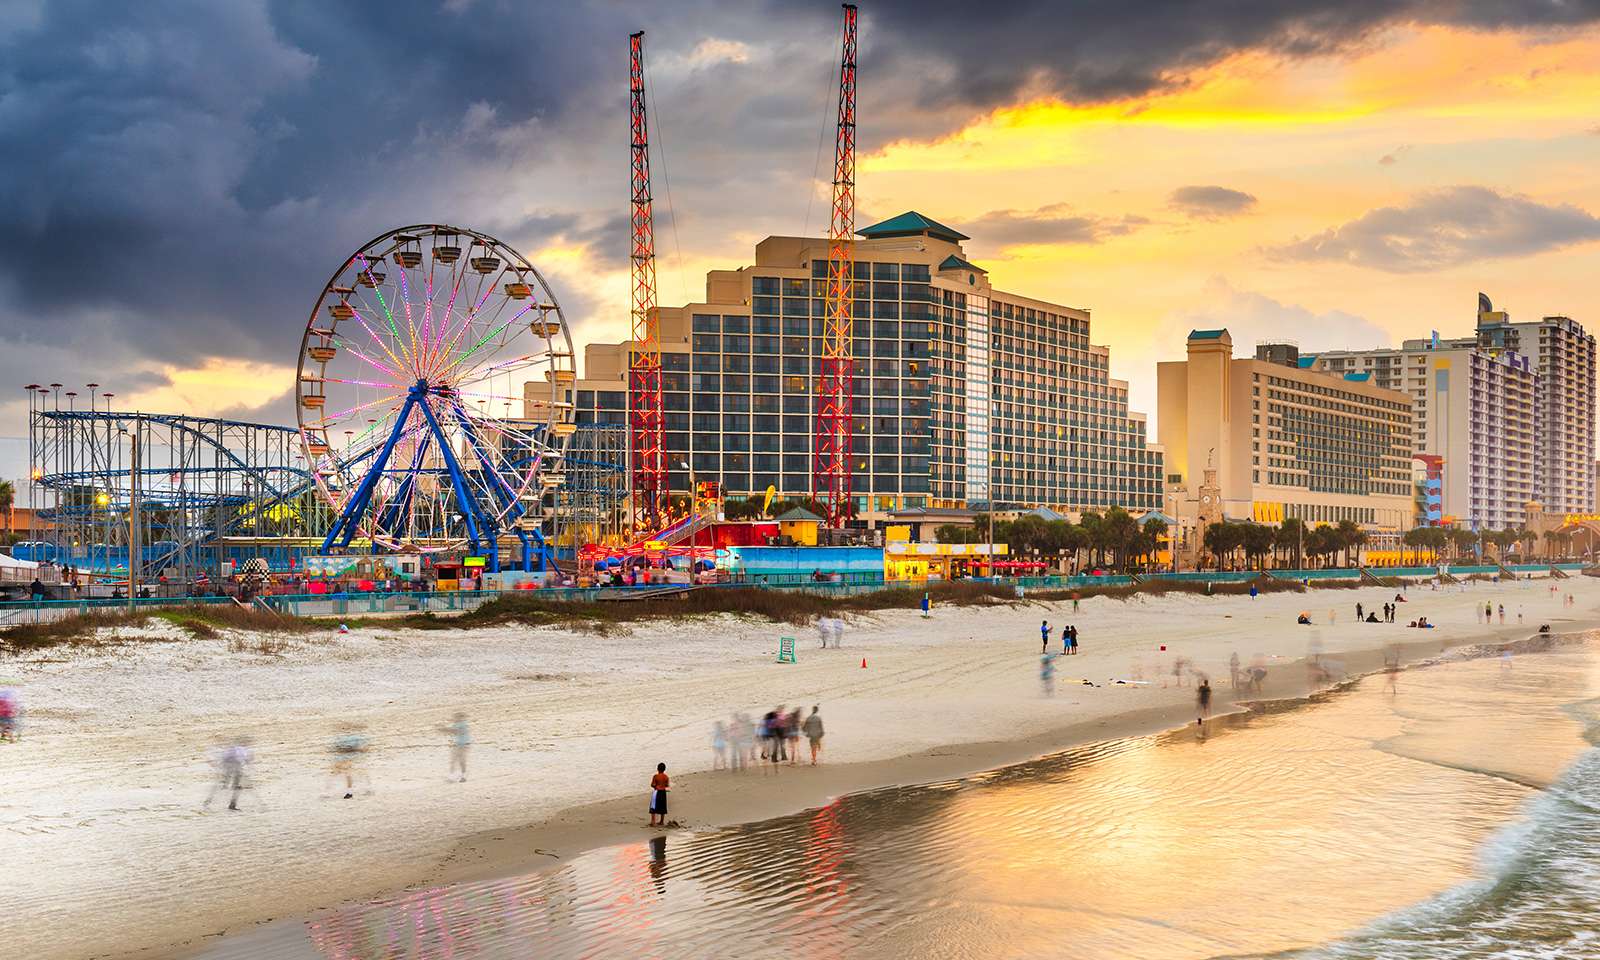 The Best Family Vacation Ideas in all 50 States